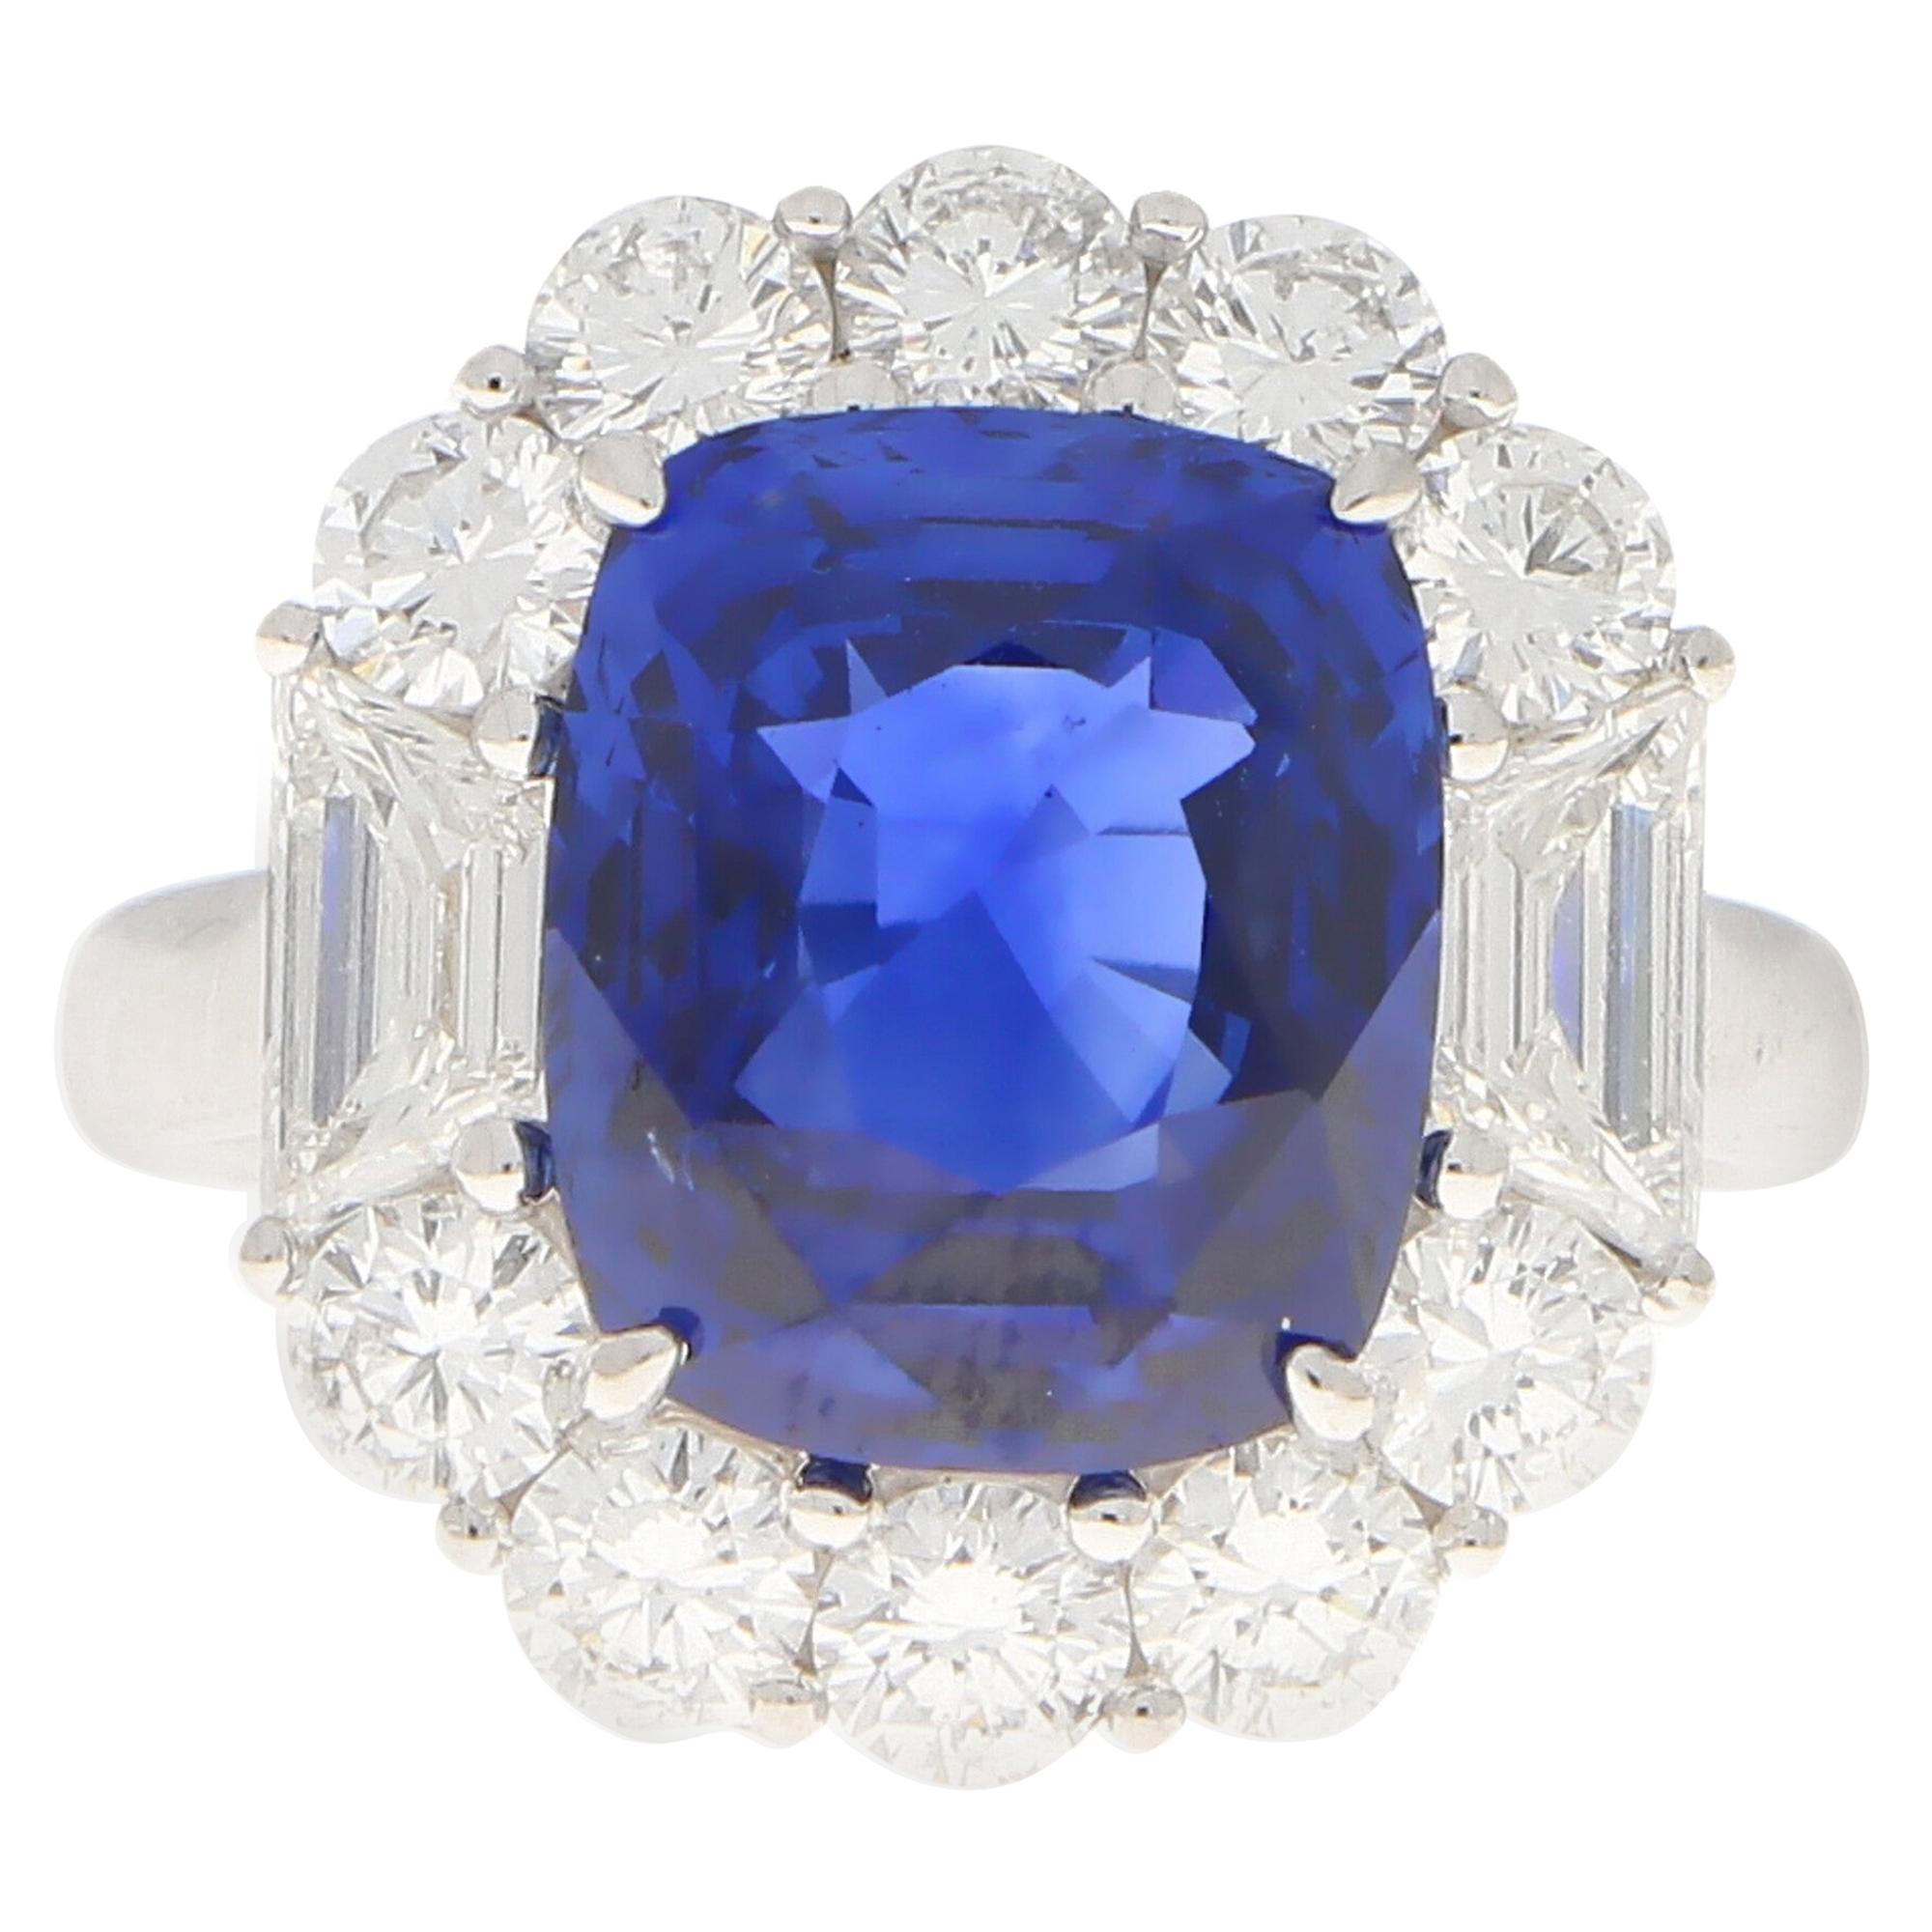 Art Deco Style 7.62 Carat Blue Sapphire and Diamond Cluster Ring Set in Platinum